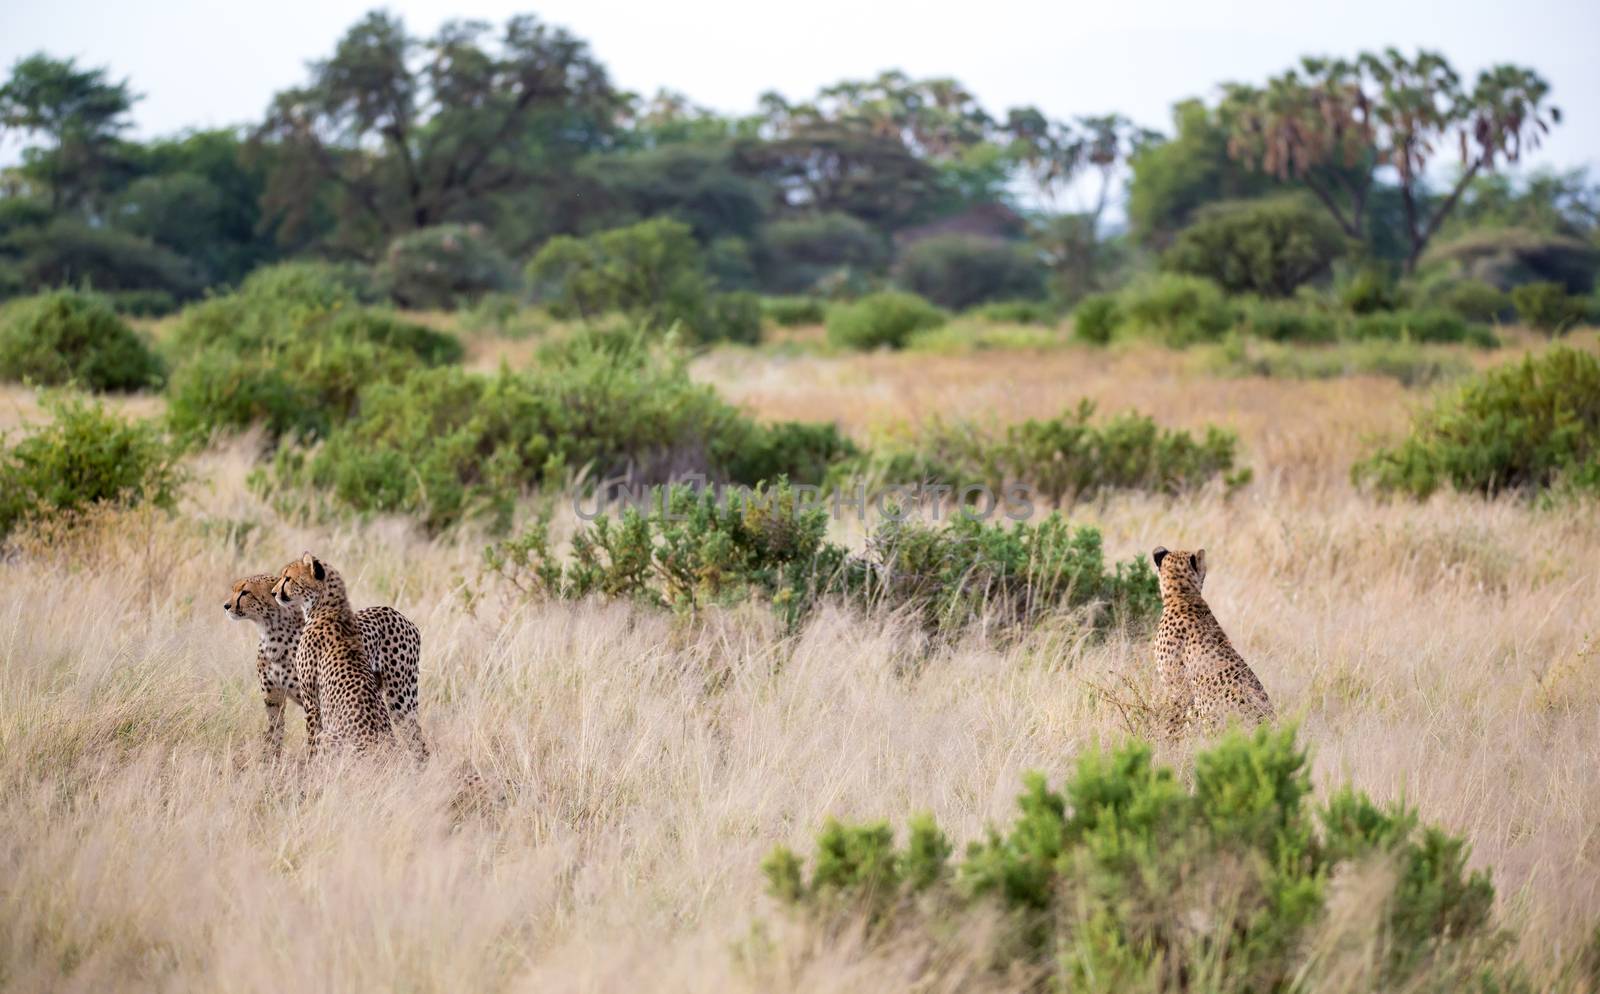 The cheetahs are running in the savannah in the tall grass